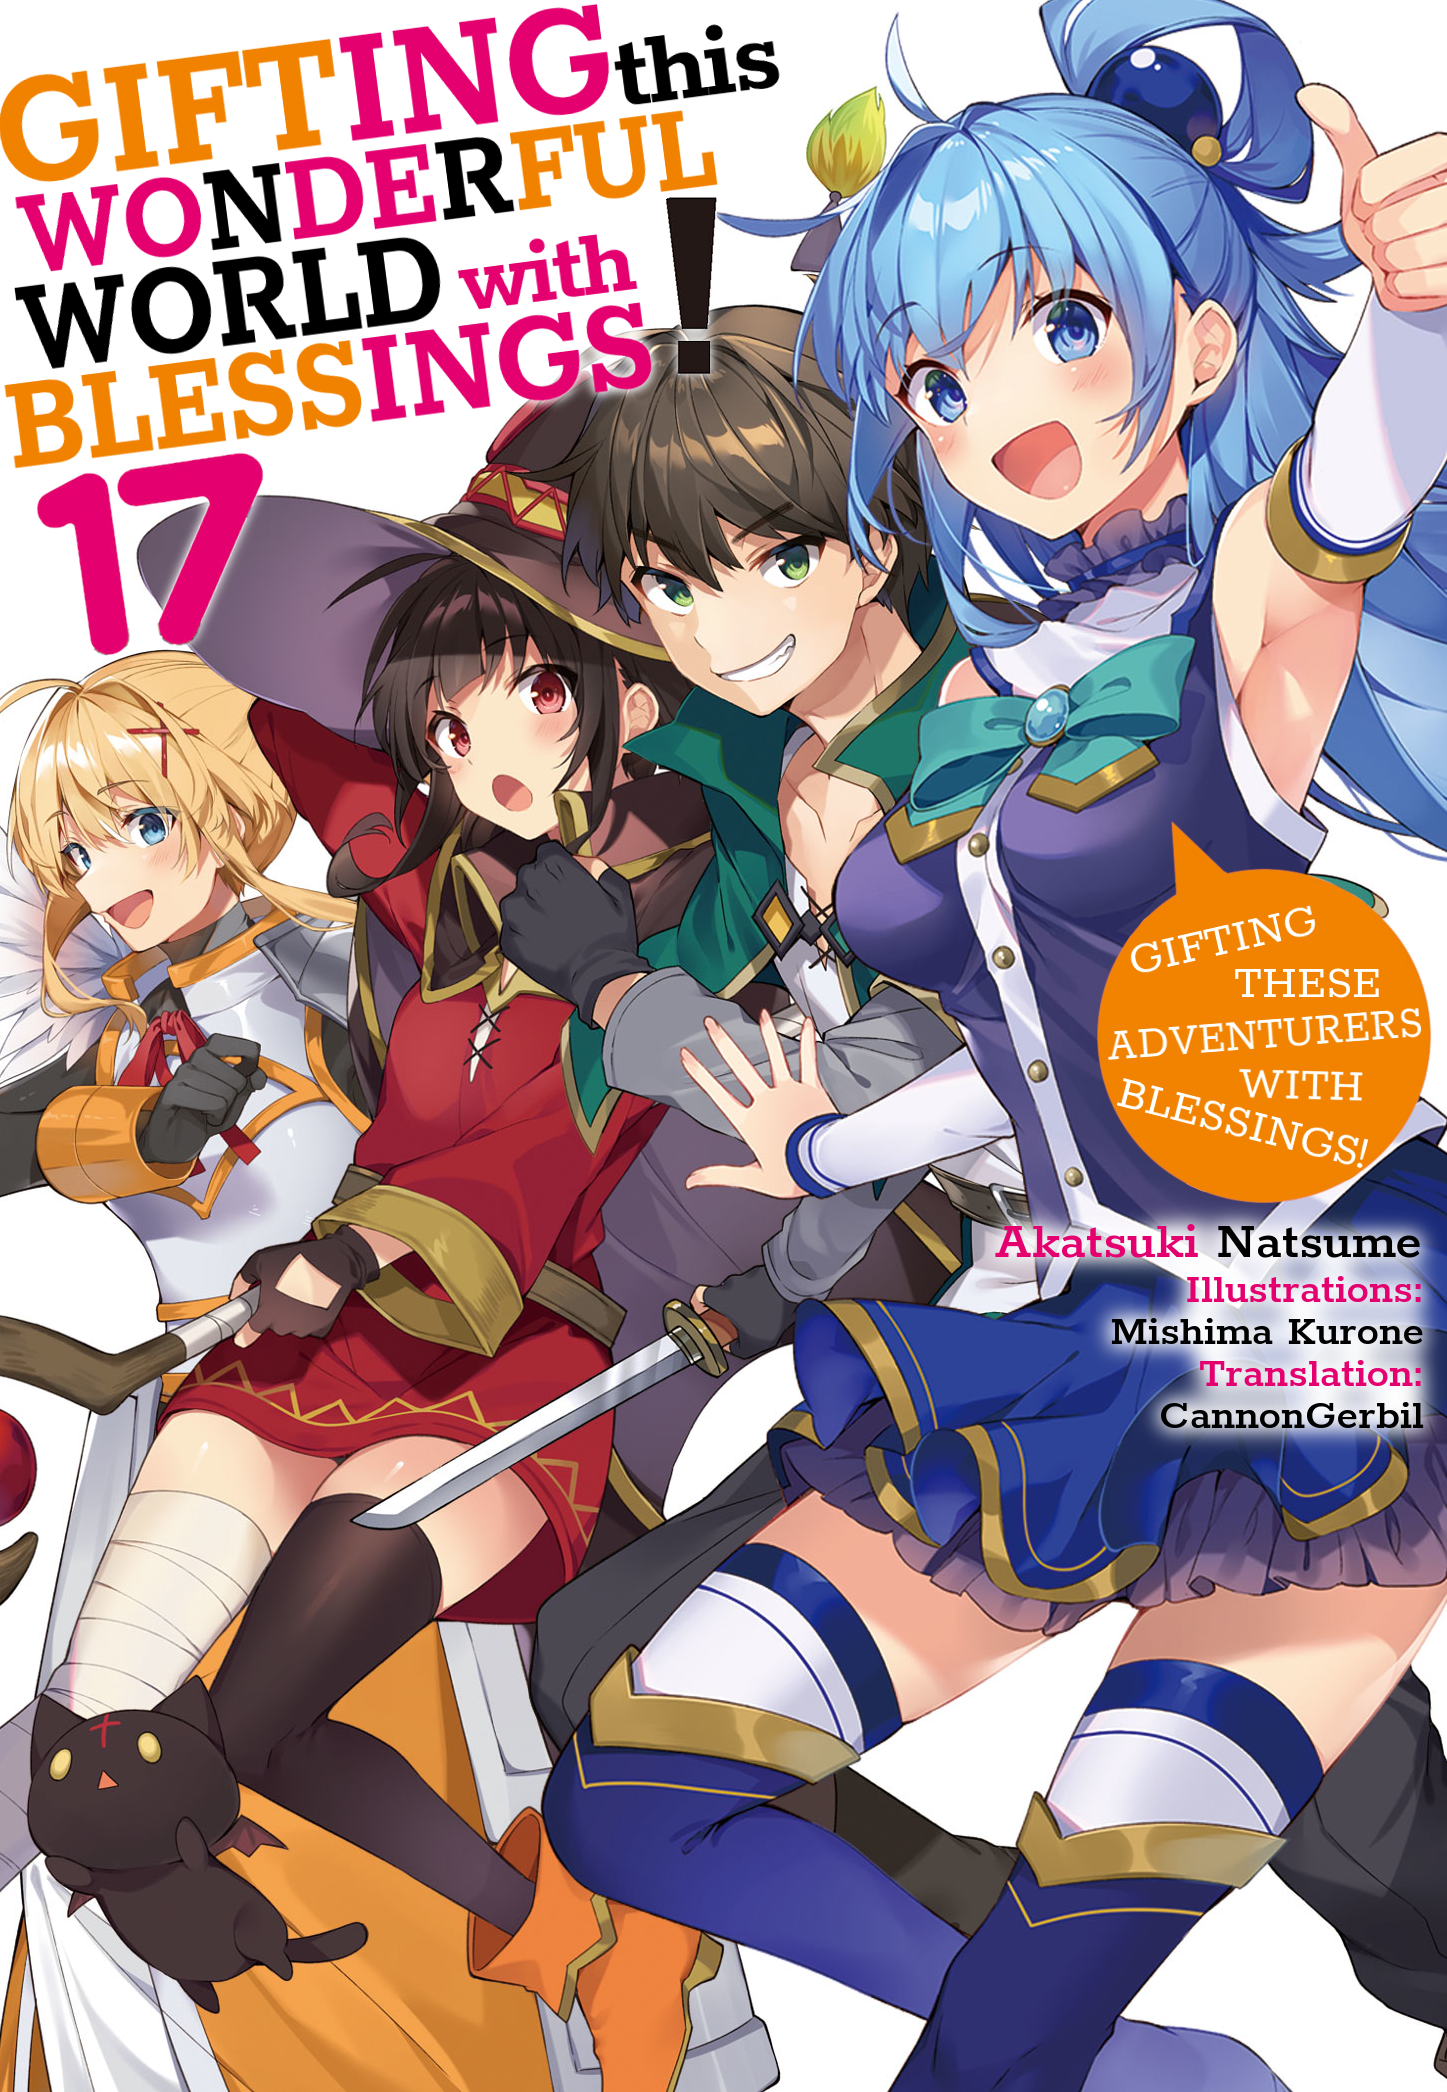 Main directory: Gifting this Wonderful World with Blessings!